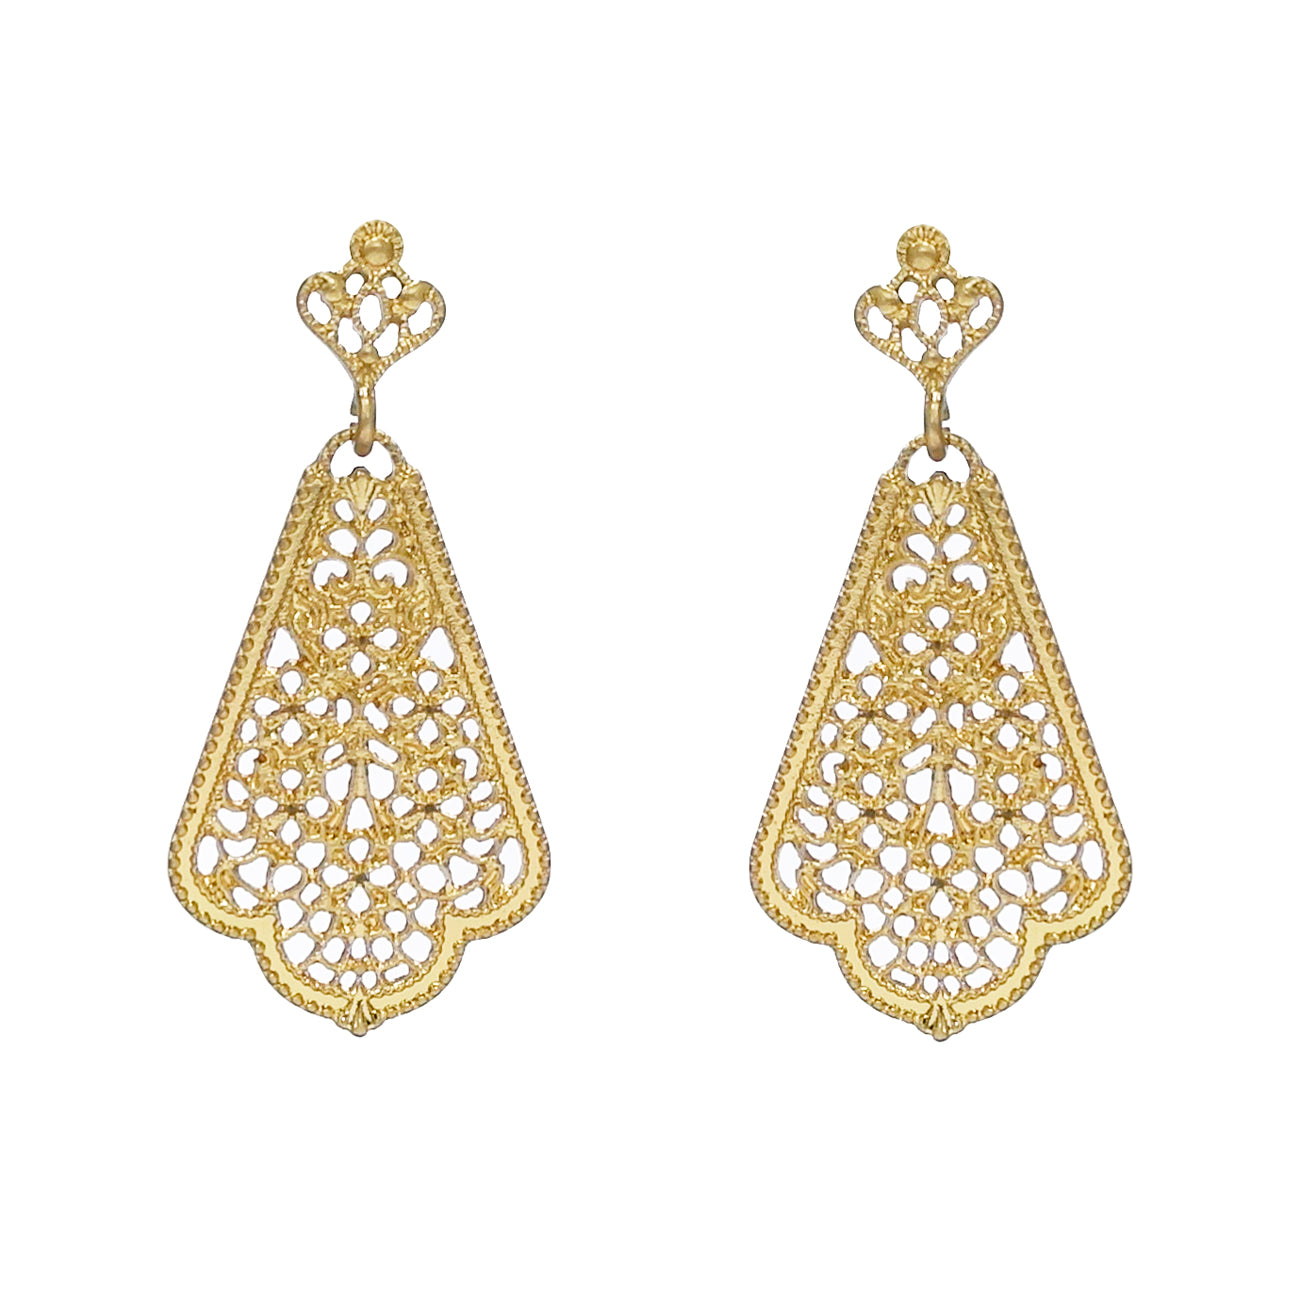 Completely Different Gold Dangle Earrings